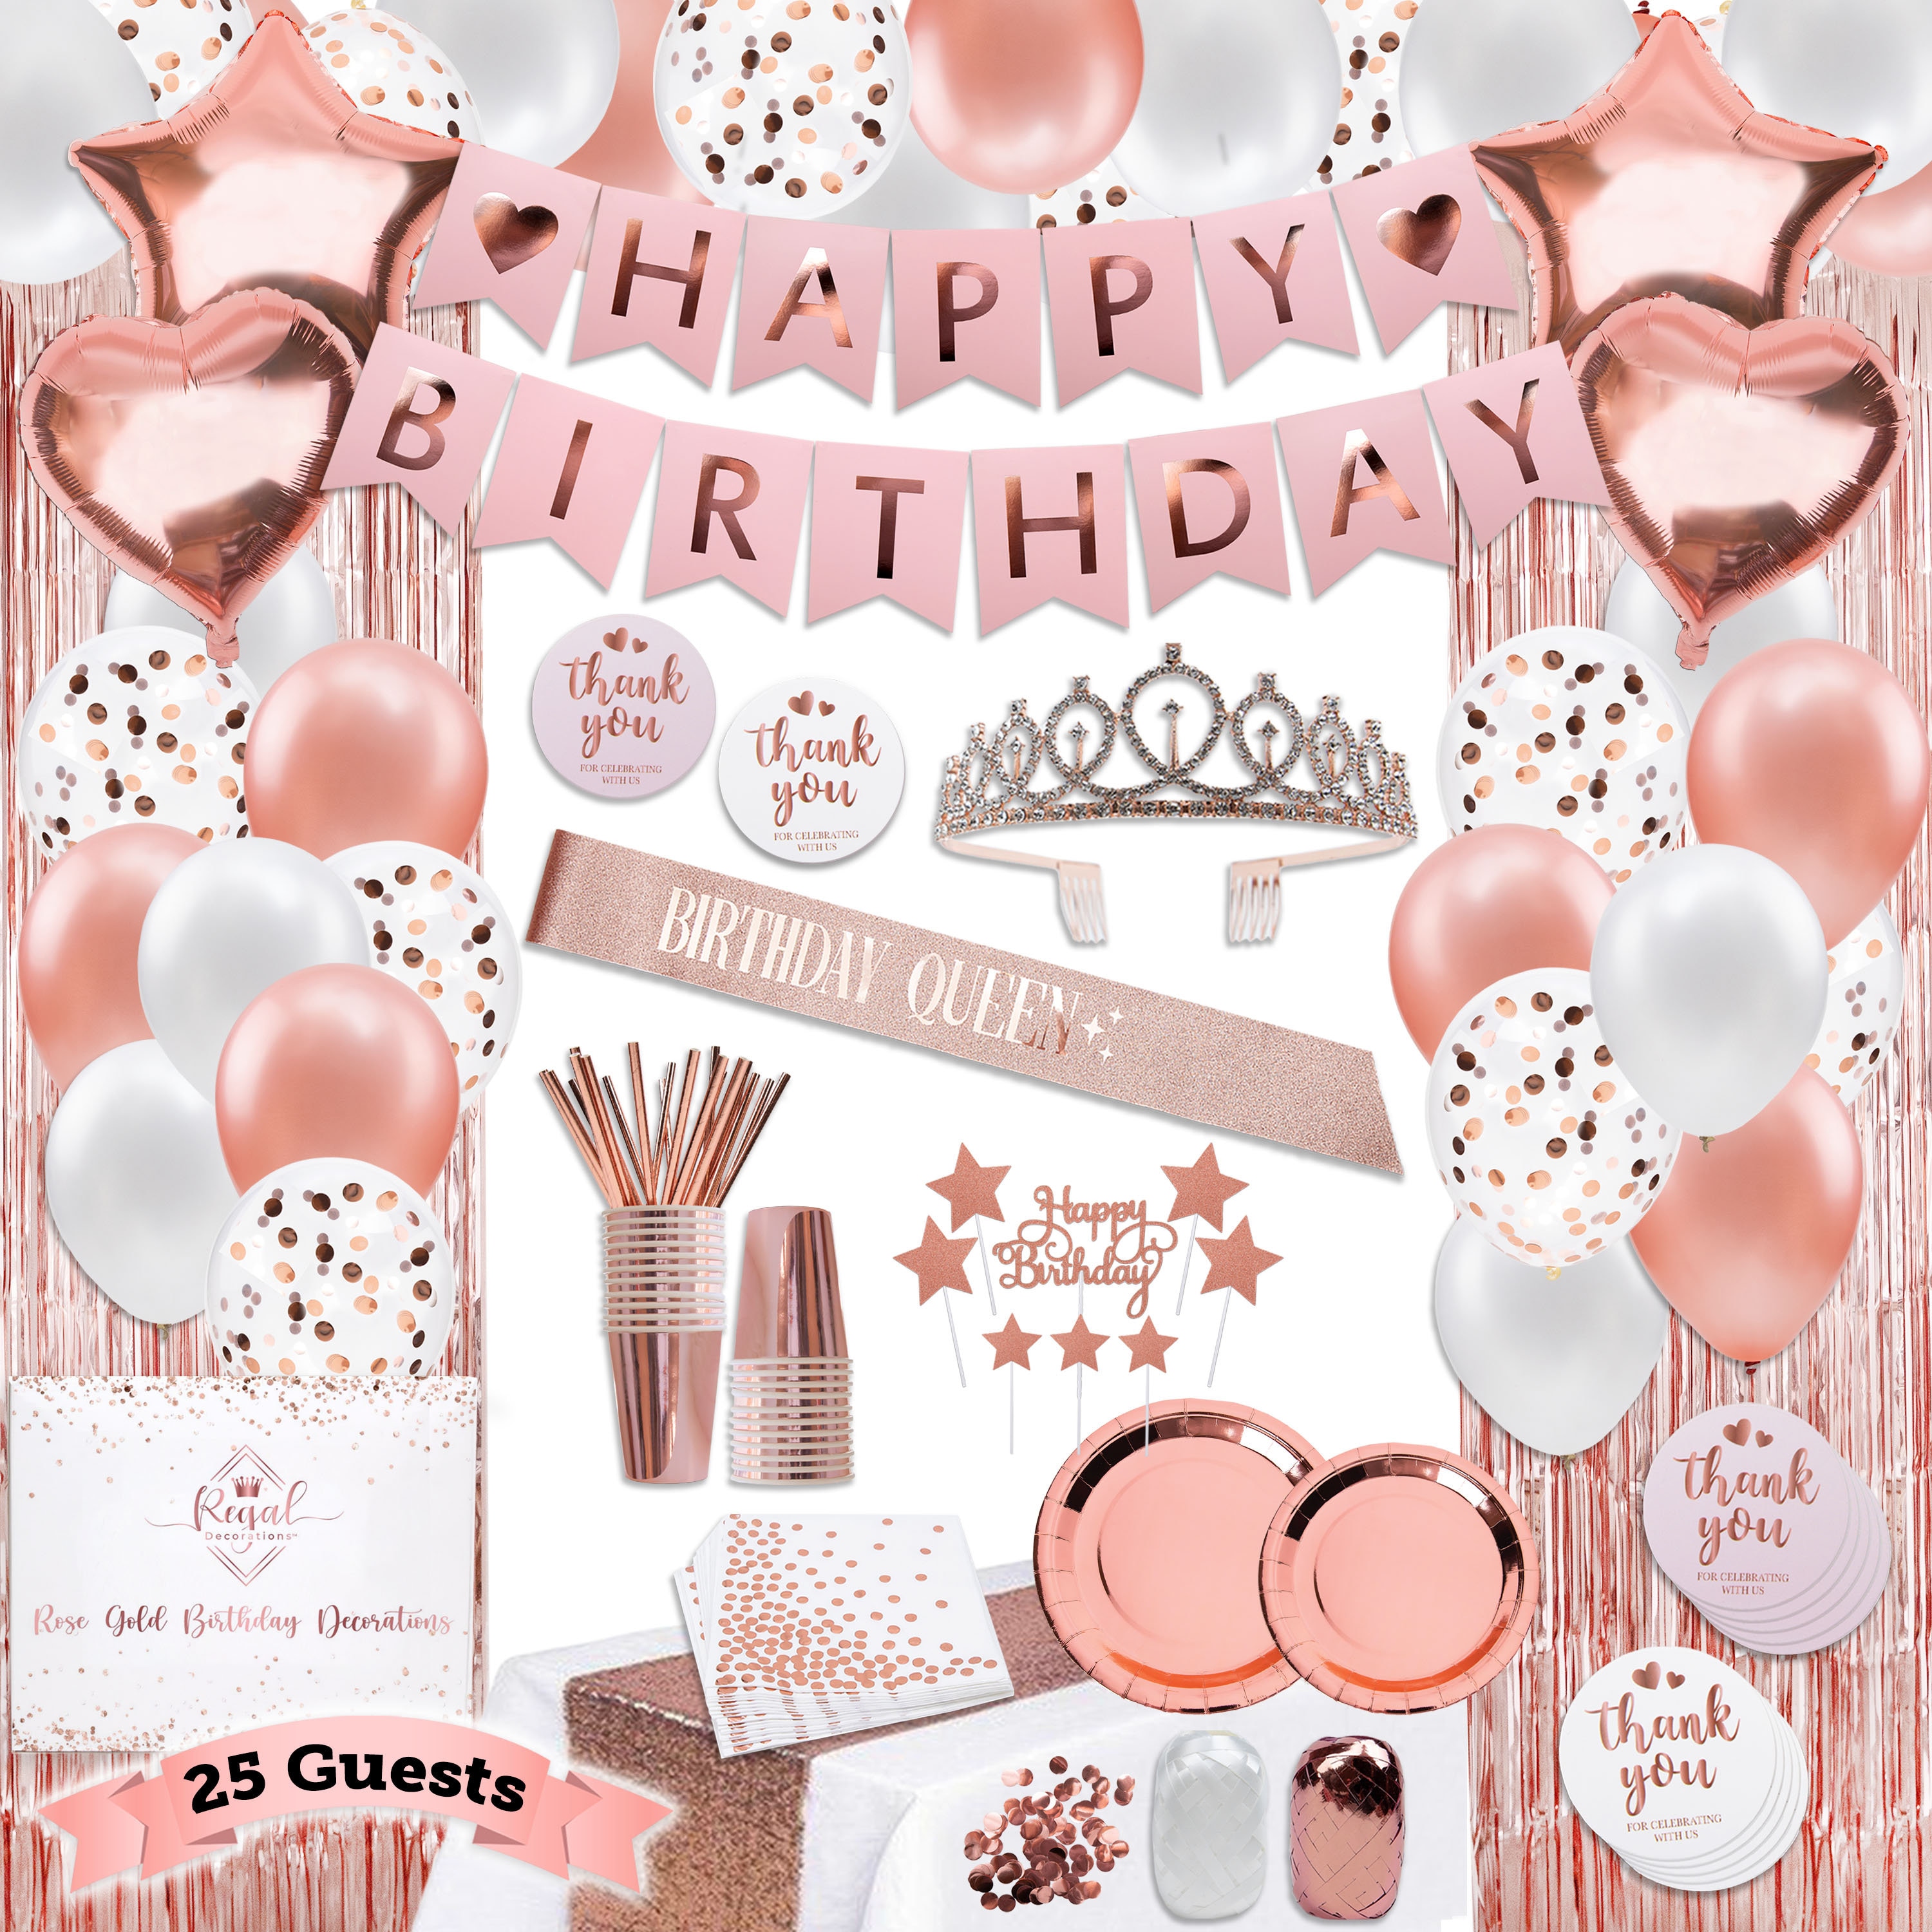 225PC Rose Gold Birthday Party Decorations Kit for Girls, Teens, Women  Birthday Banners Curtains Table Runner Tiara Cake Topper Plates Cup 